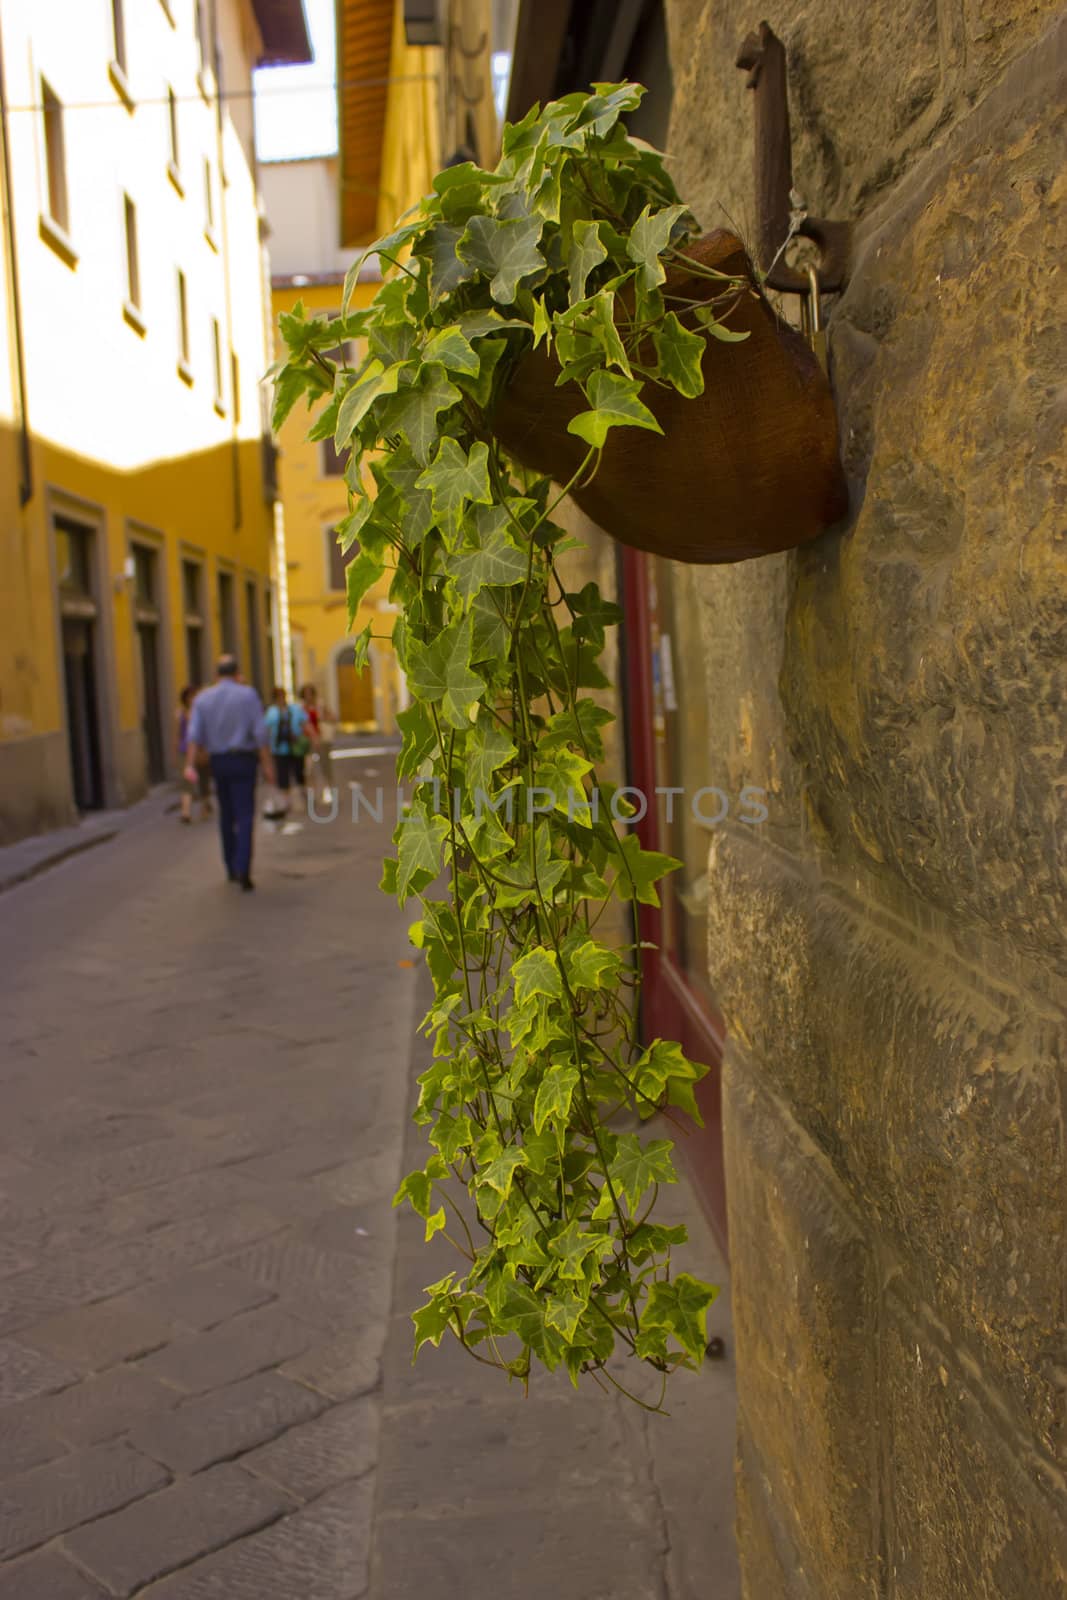 Cascading ivy out of pot against a wall in a street.